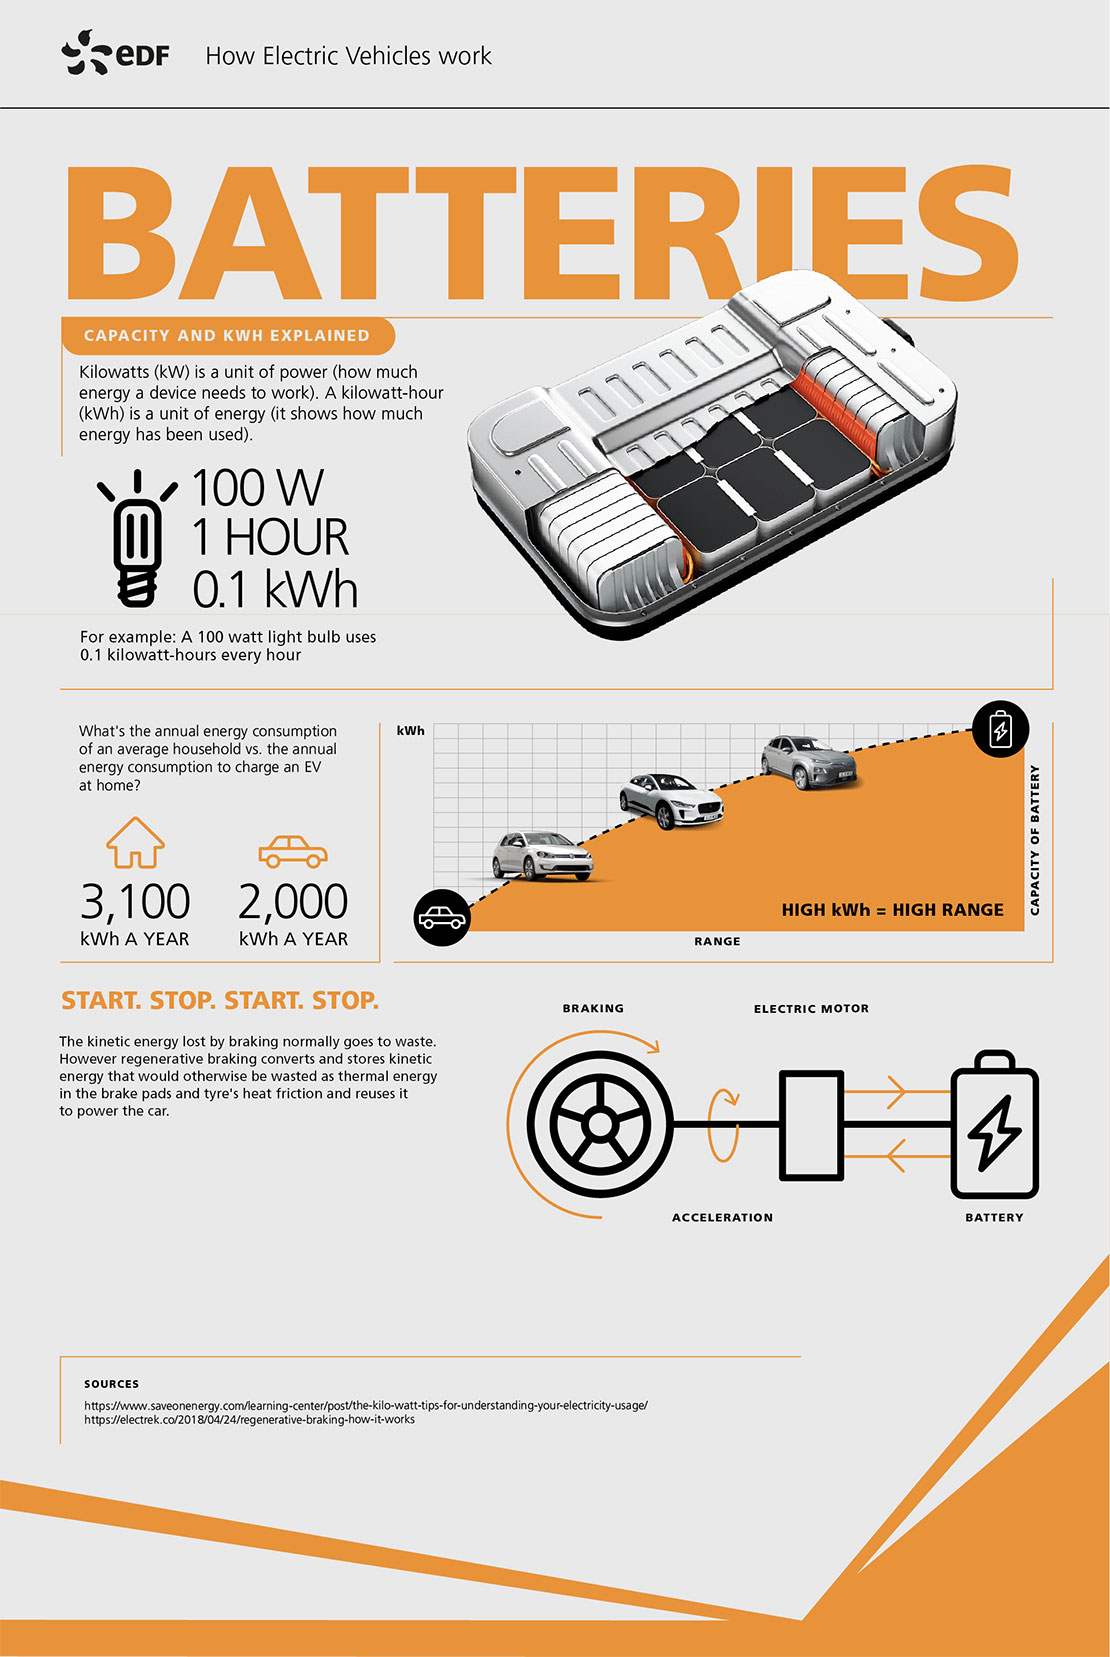 Batteries infographic: Kilowatts is a unit of power - how much energy a device needs to work. A kilowatt-hour is a unit of energy, showing how much energy has been used. For example, a 100 watt light bulb uses 0.1 kilowatt-hours every hour.